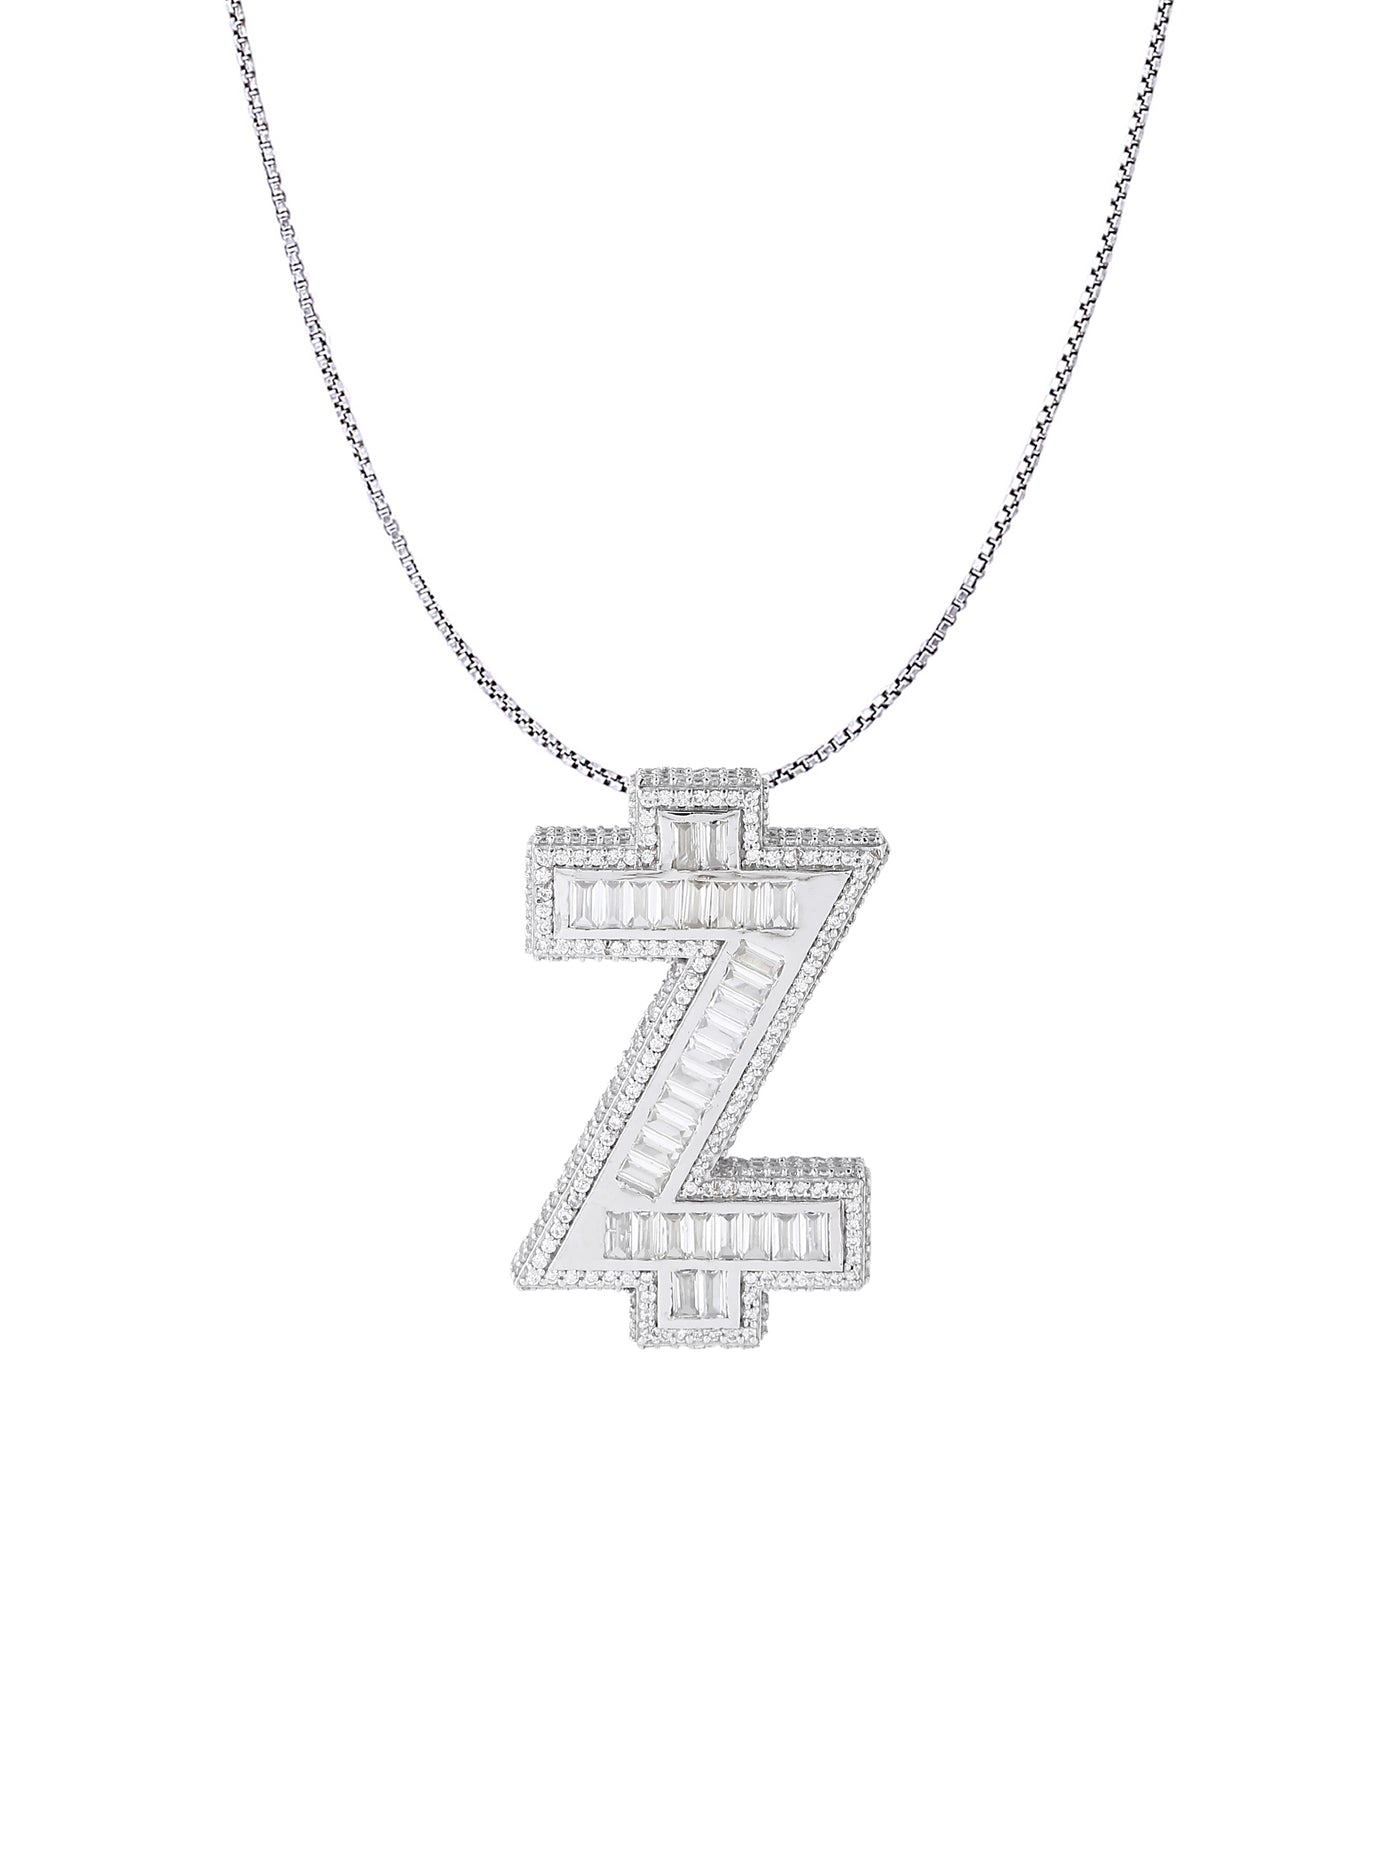 White Gold Color Z Pendant Made of 925 Sterling Silver Material with 20 Inch Long Silver Chain